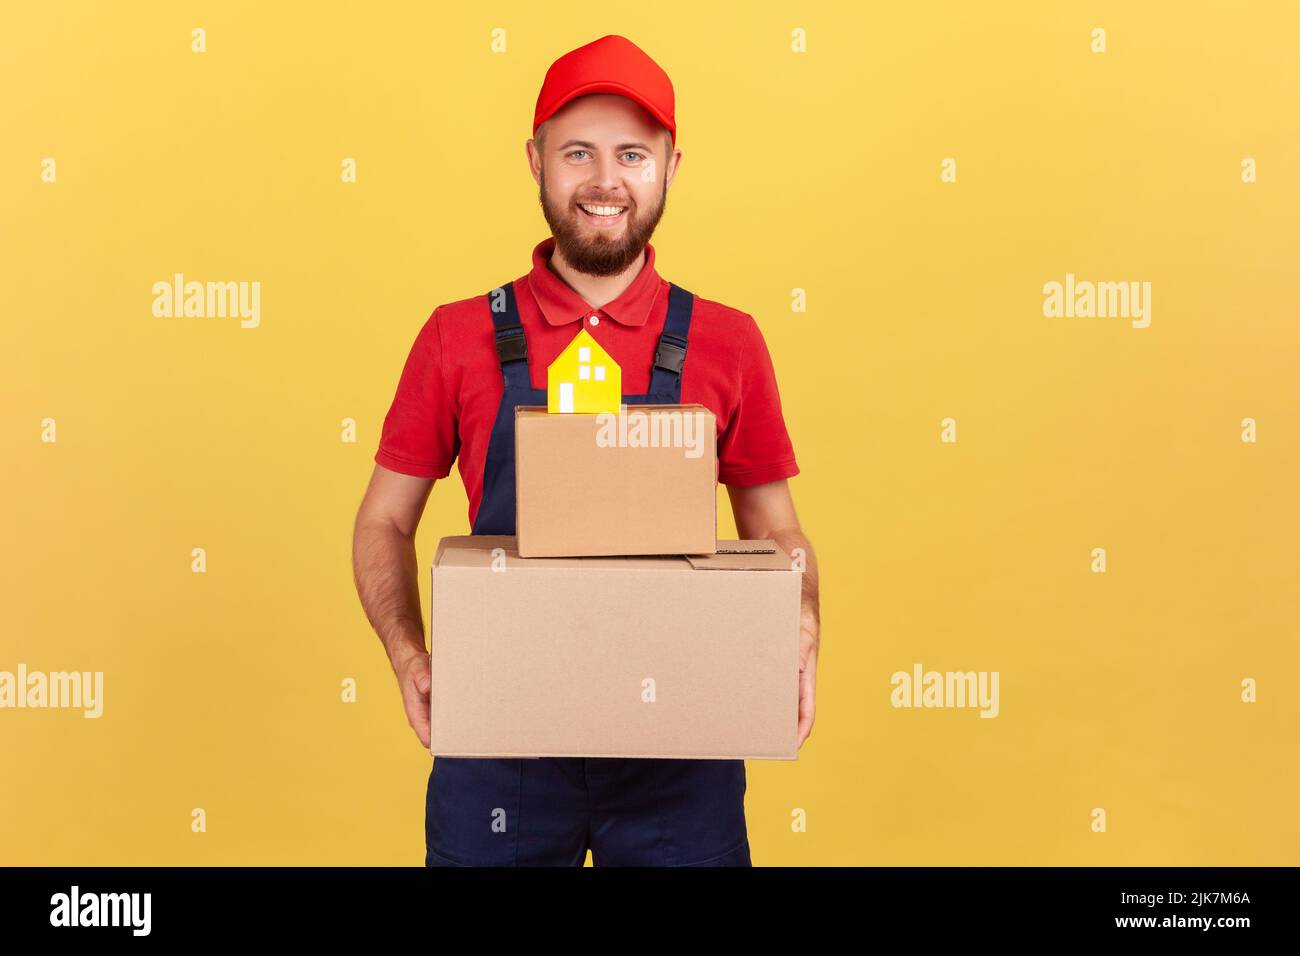 Portrait of courier man in blue coveralls and red T-shirt holding cardboard boxes with paper house on top, movement company, safe delivery. Indoor studio shot isolated on yellow background. Stock Photo